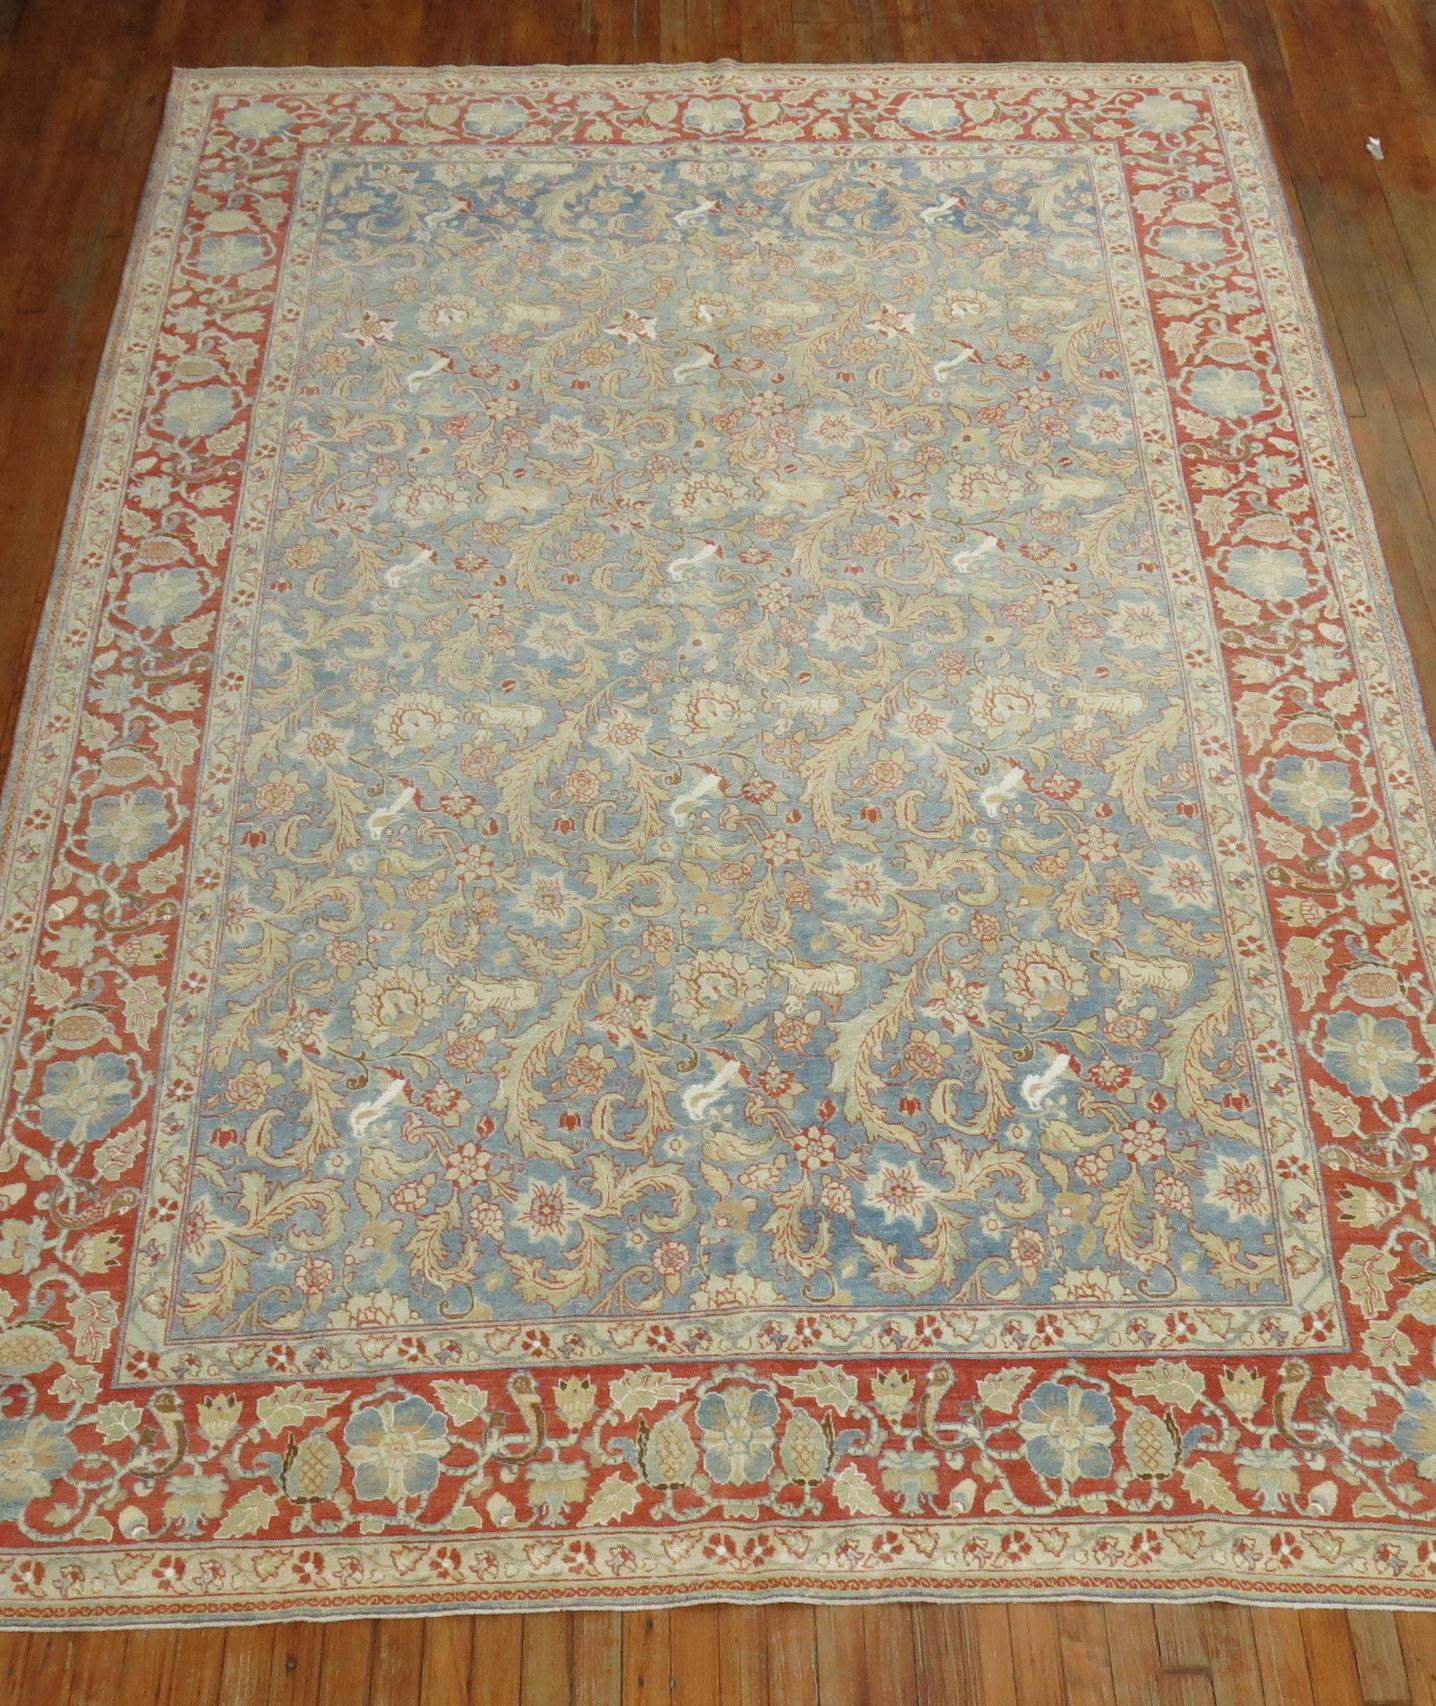 early 20th century Persian Tabriz Pictorial rug in predominant light blue featuring a flurry of small animals floating in field and border. 

Measures: 7'4